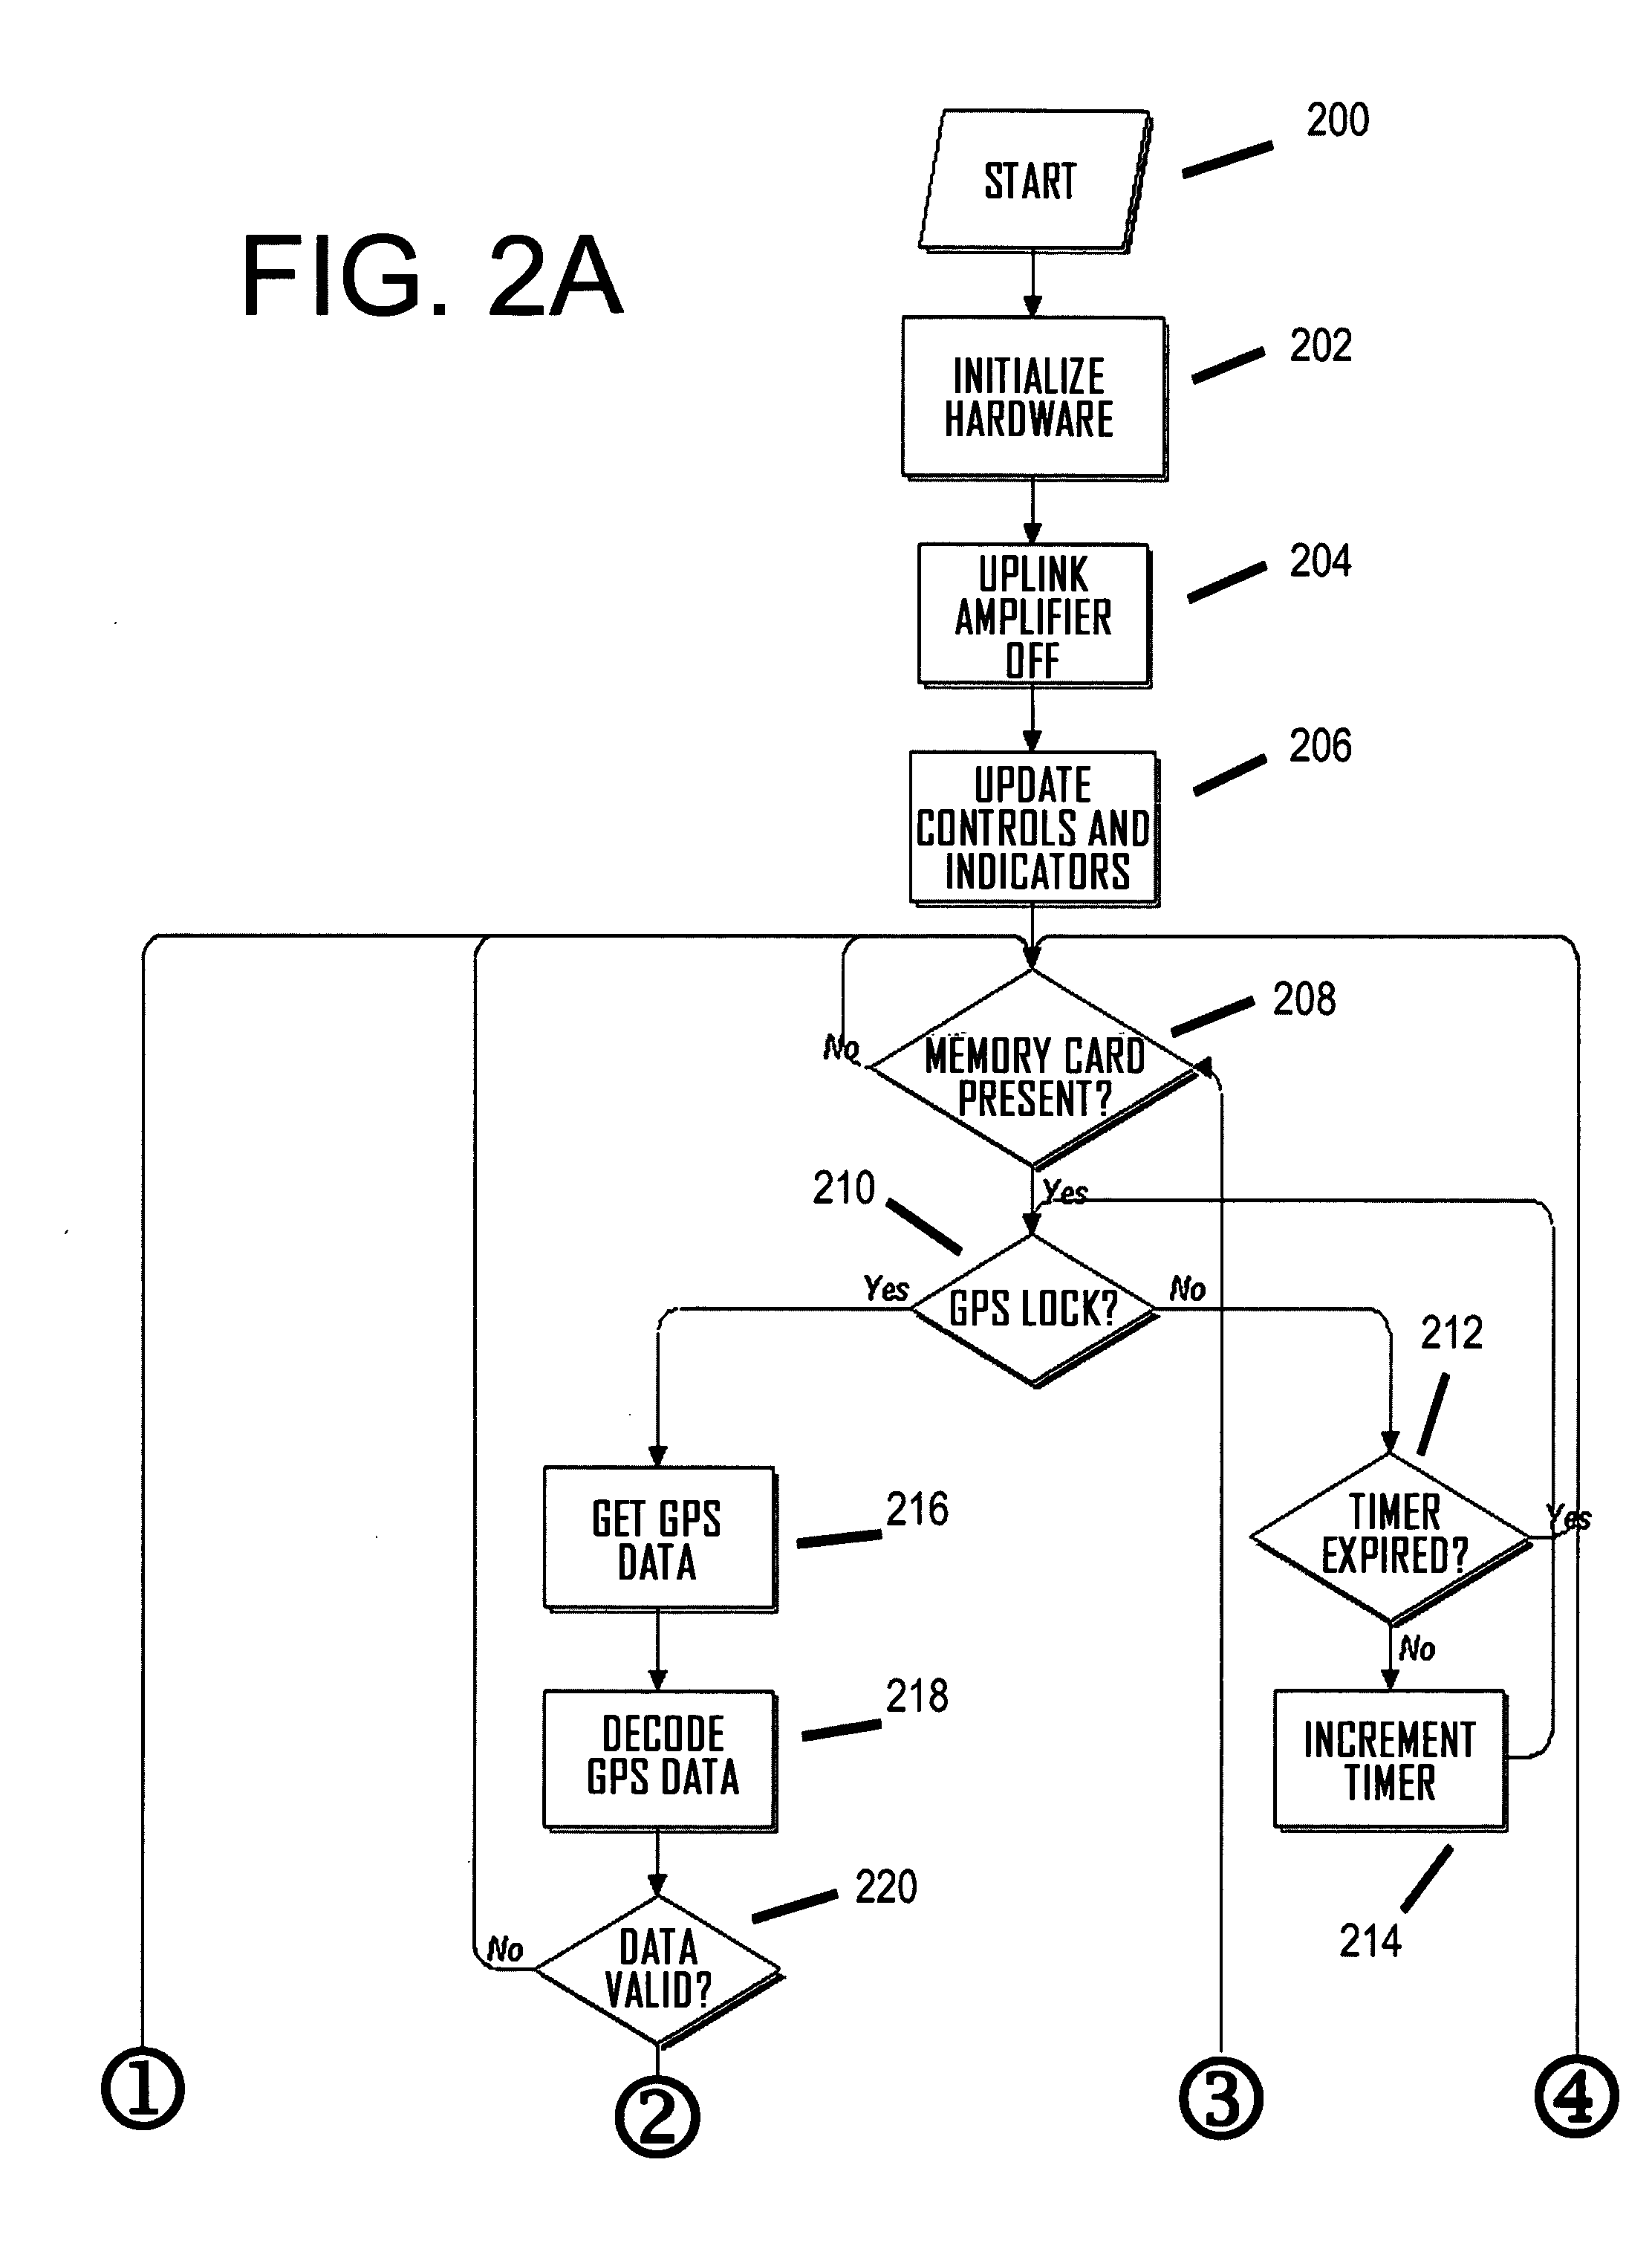 Multi-band, multi-channel, location-aware communications booster